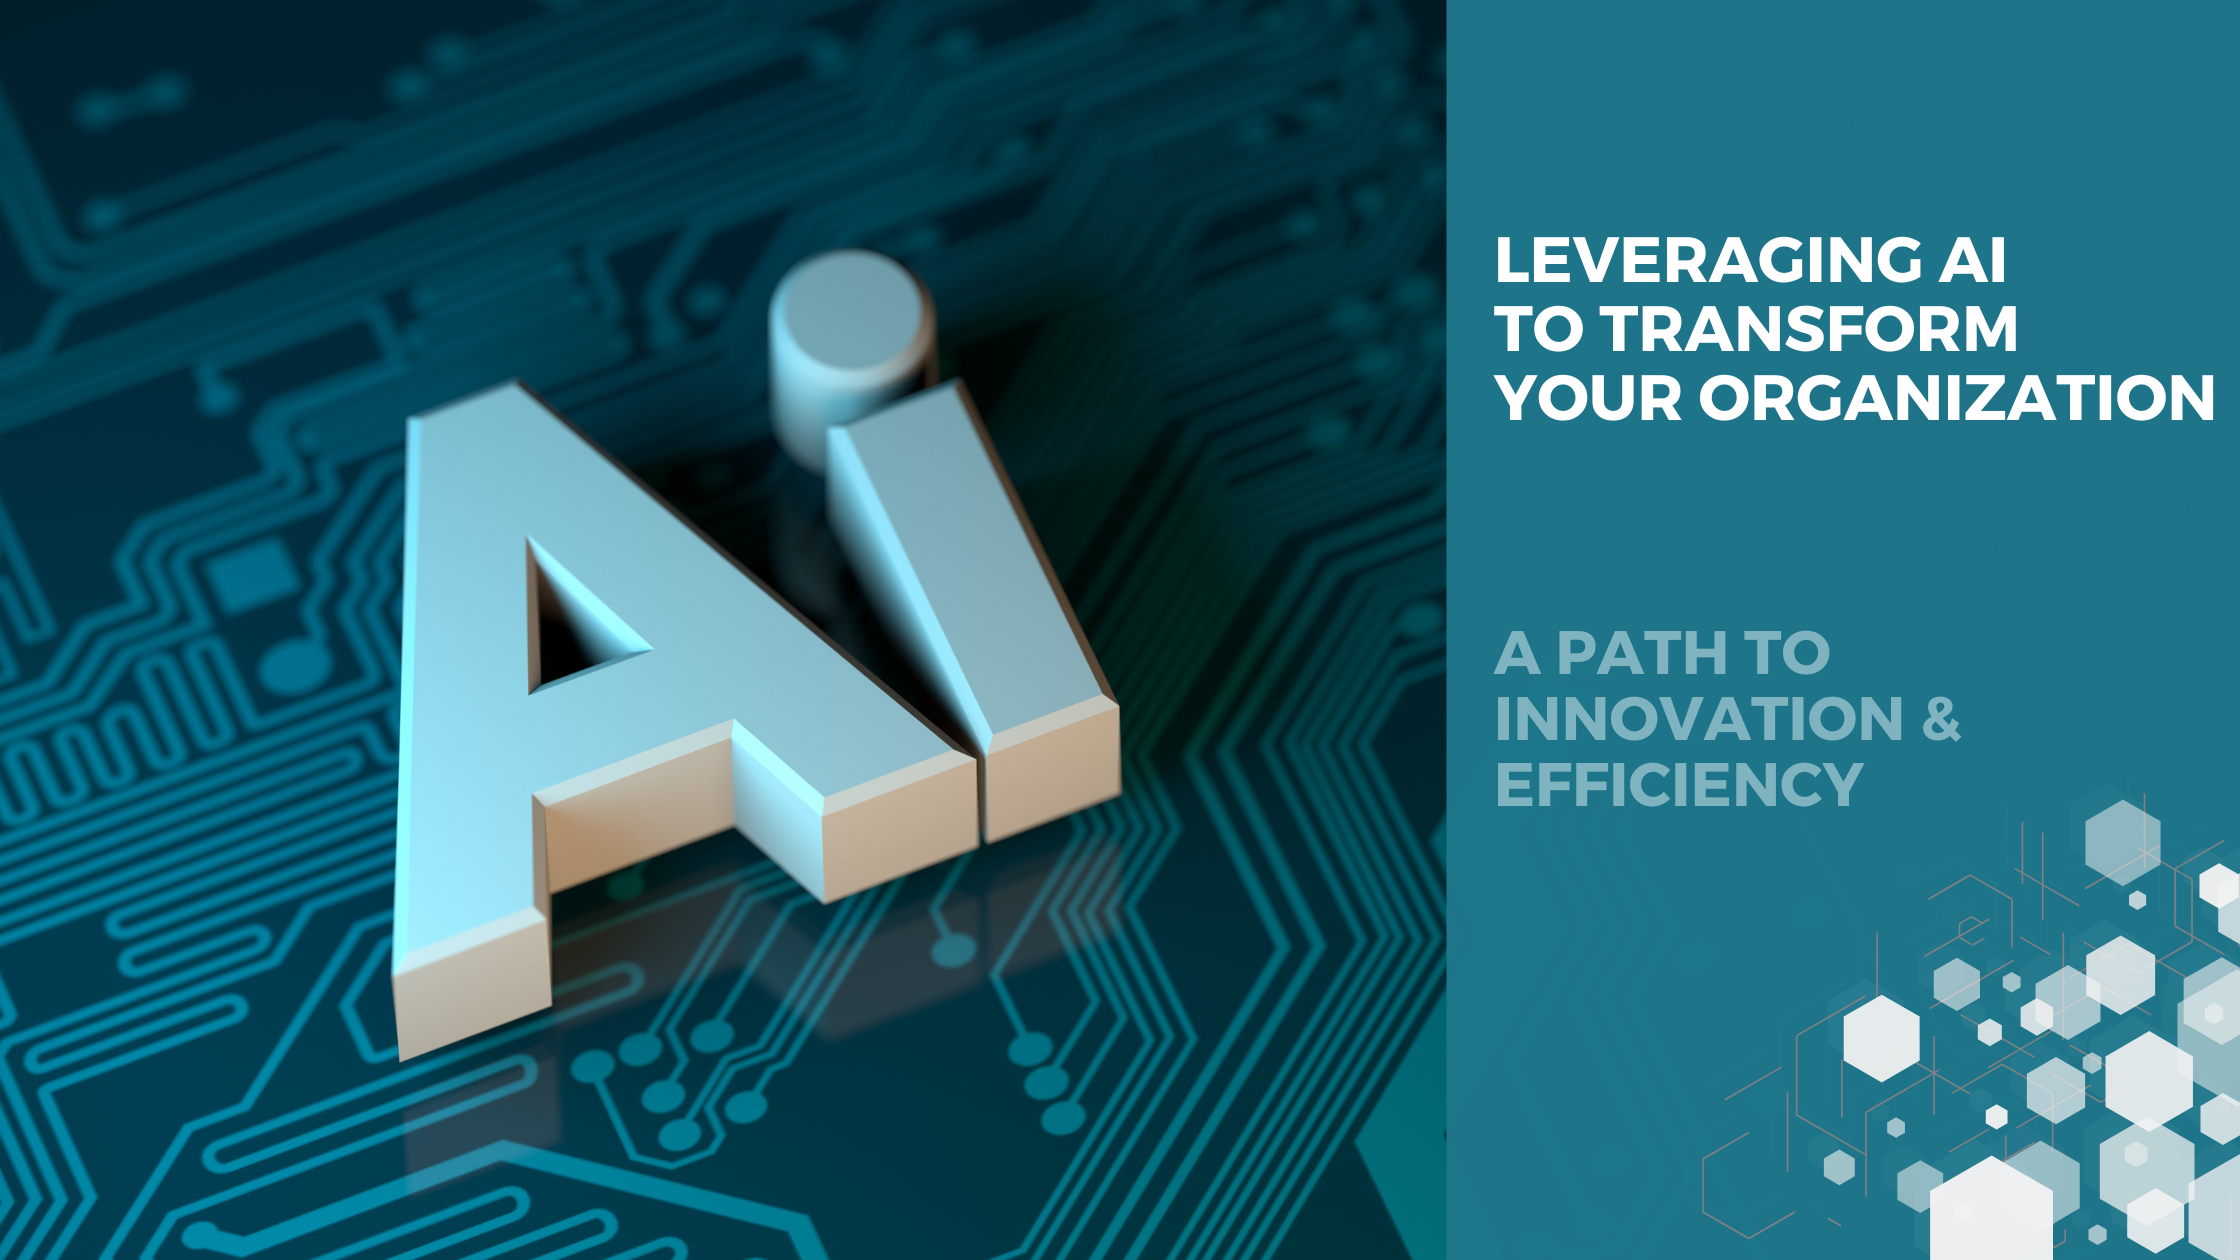 Leveraging AI to Transform Your Organization. A Path to Innovation and Efficiency